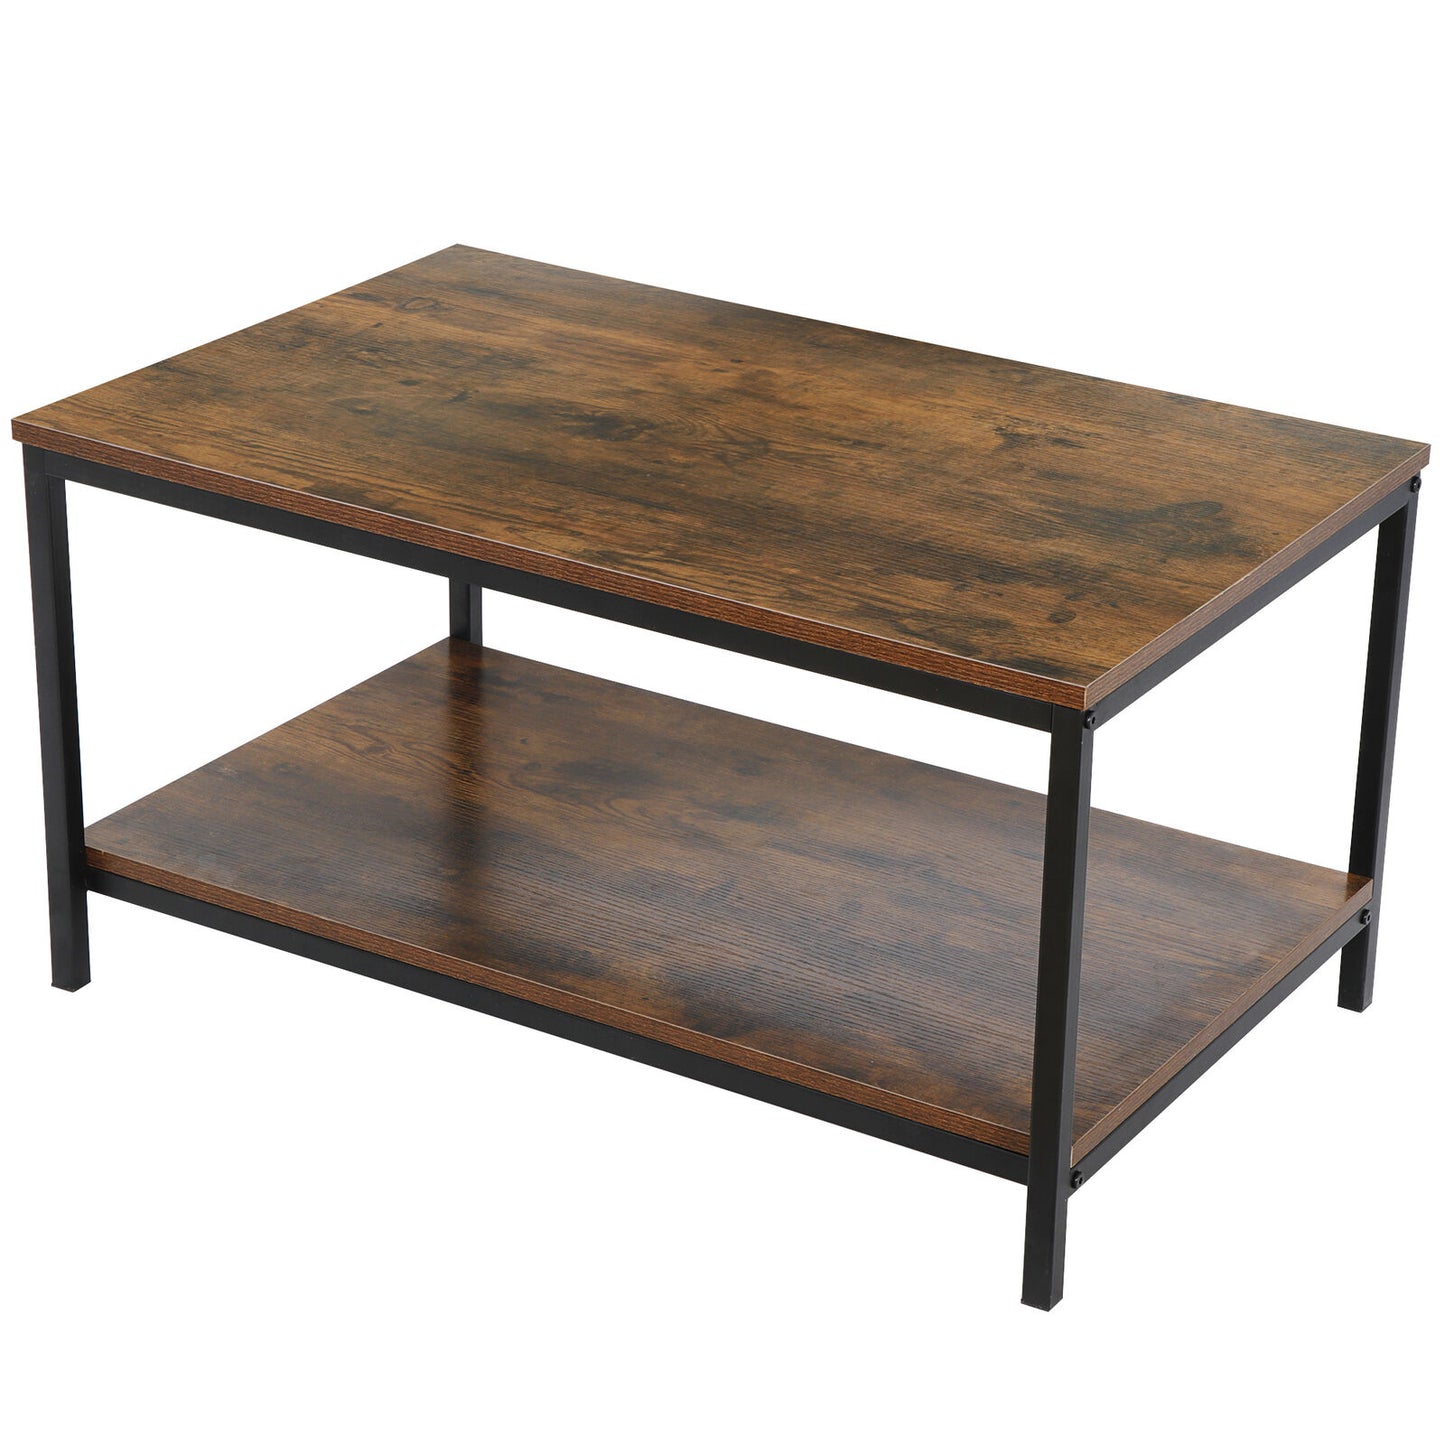 2-Tier Small Coffee Table Rectangle Wood Side End Table w/ Storage Rustic Brown